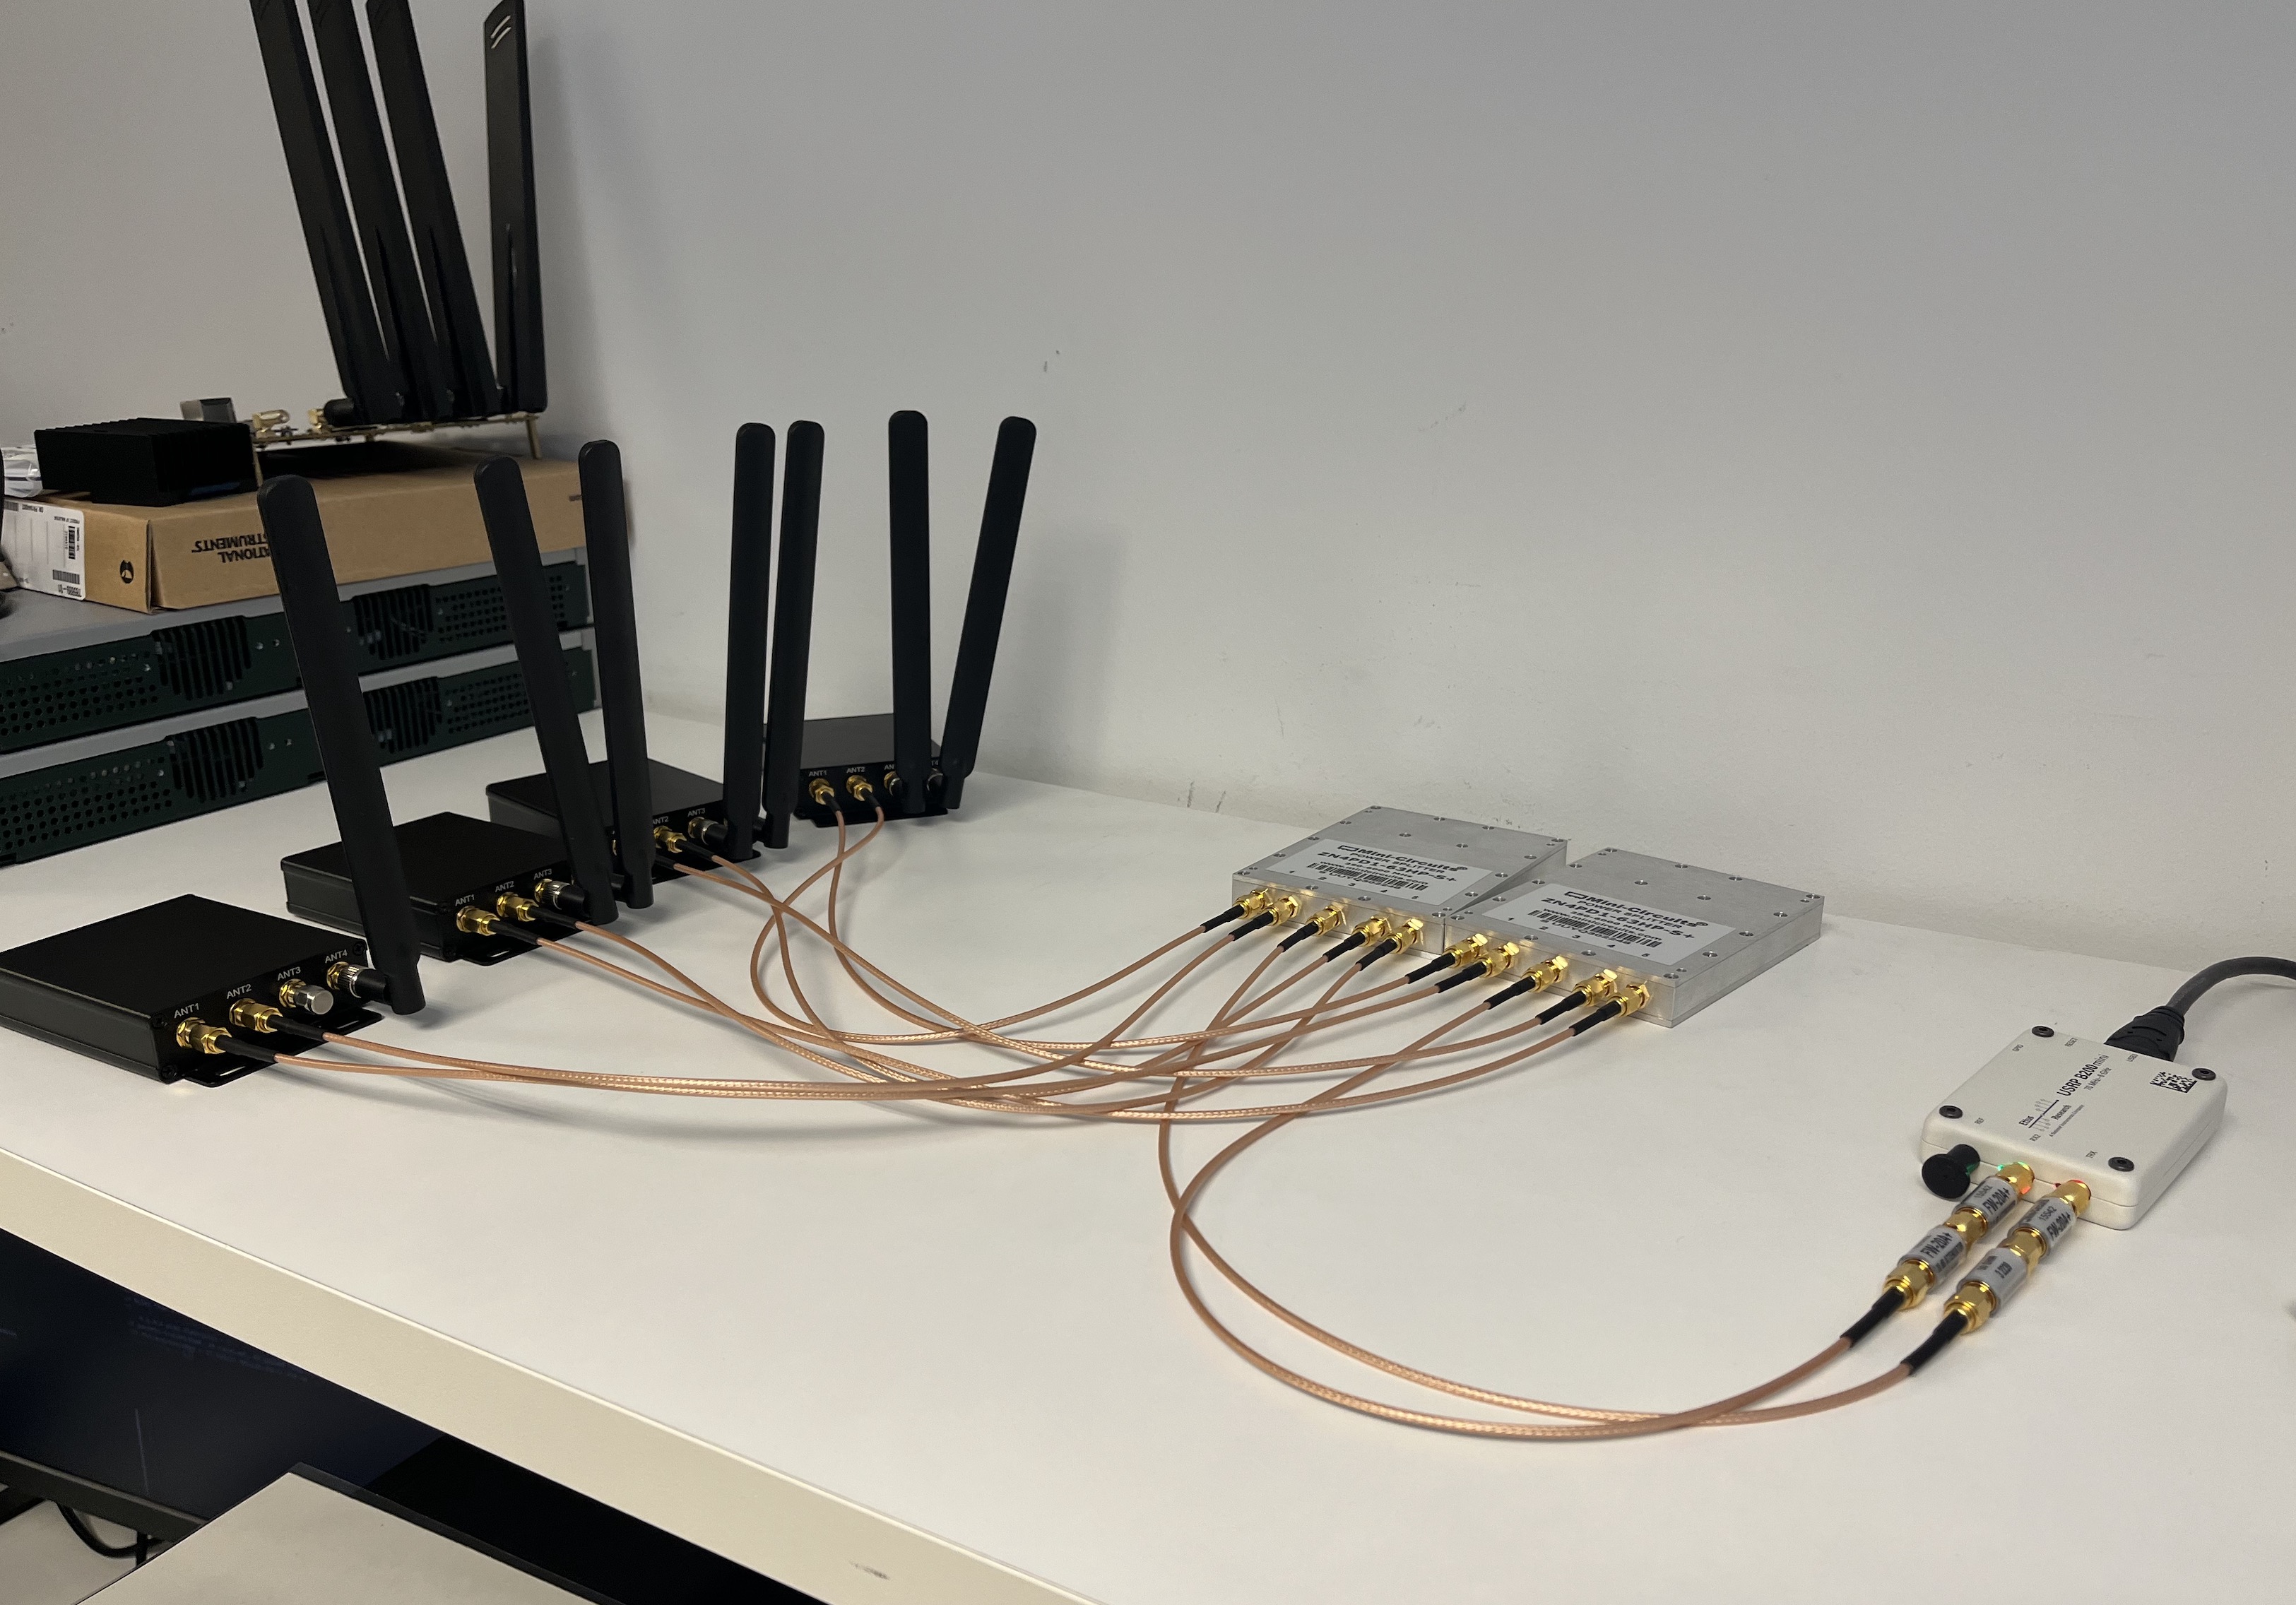 Client's 5G modems connected to the basestation